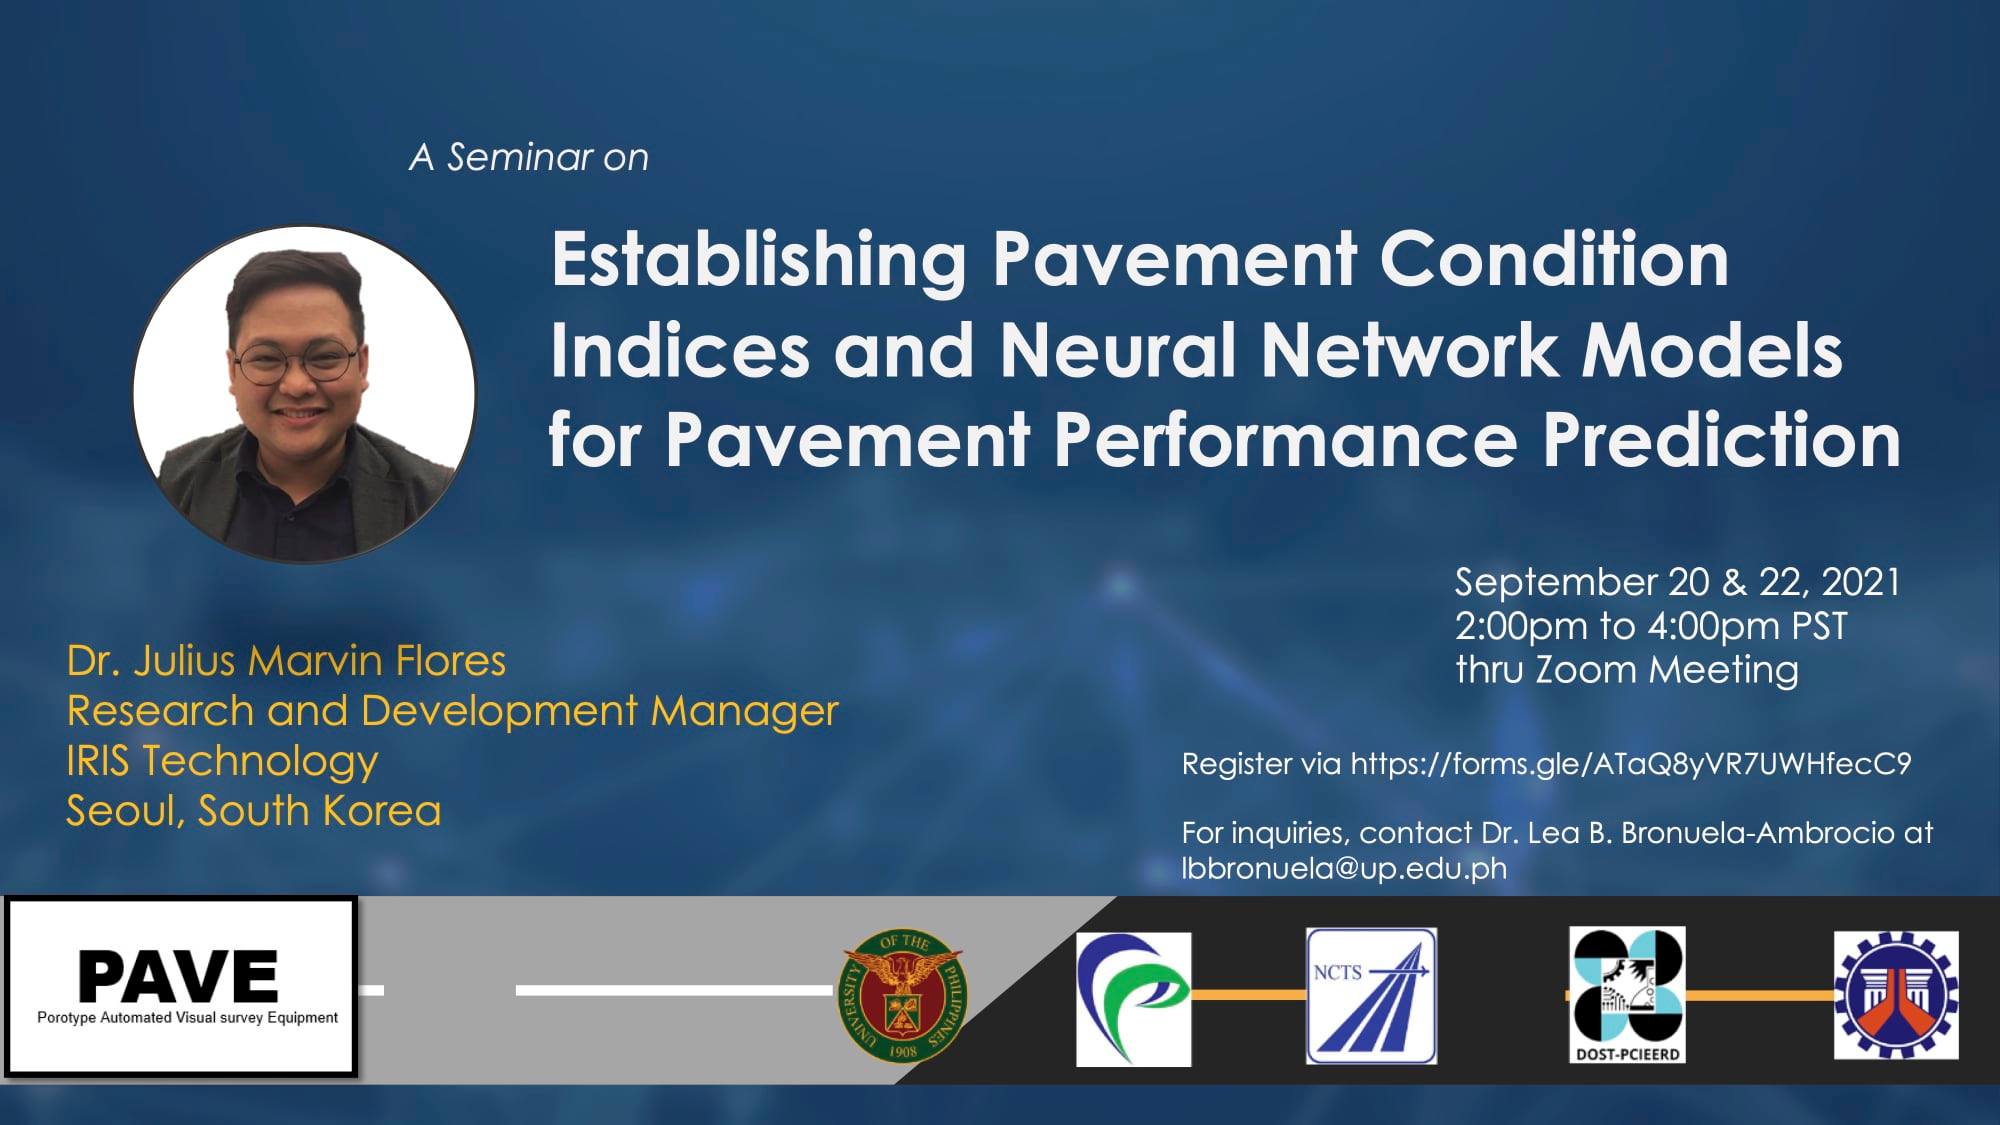 Seminar on Establishing Pavement Condition Indices and Neural Network Models for Pavement Performance Prediction